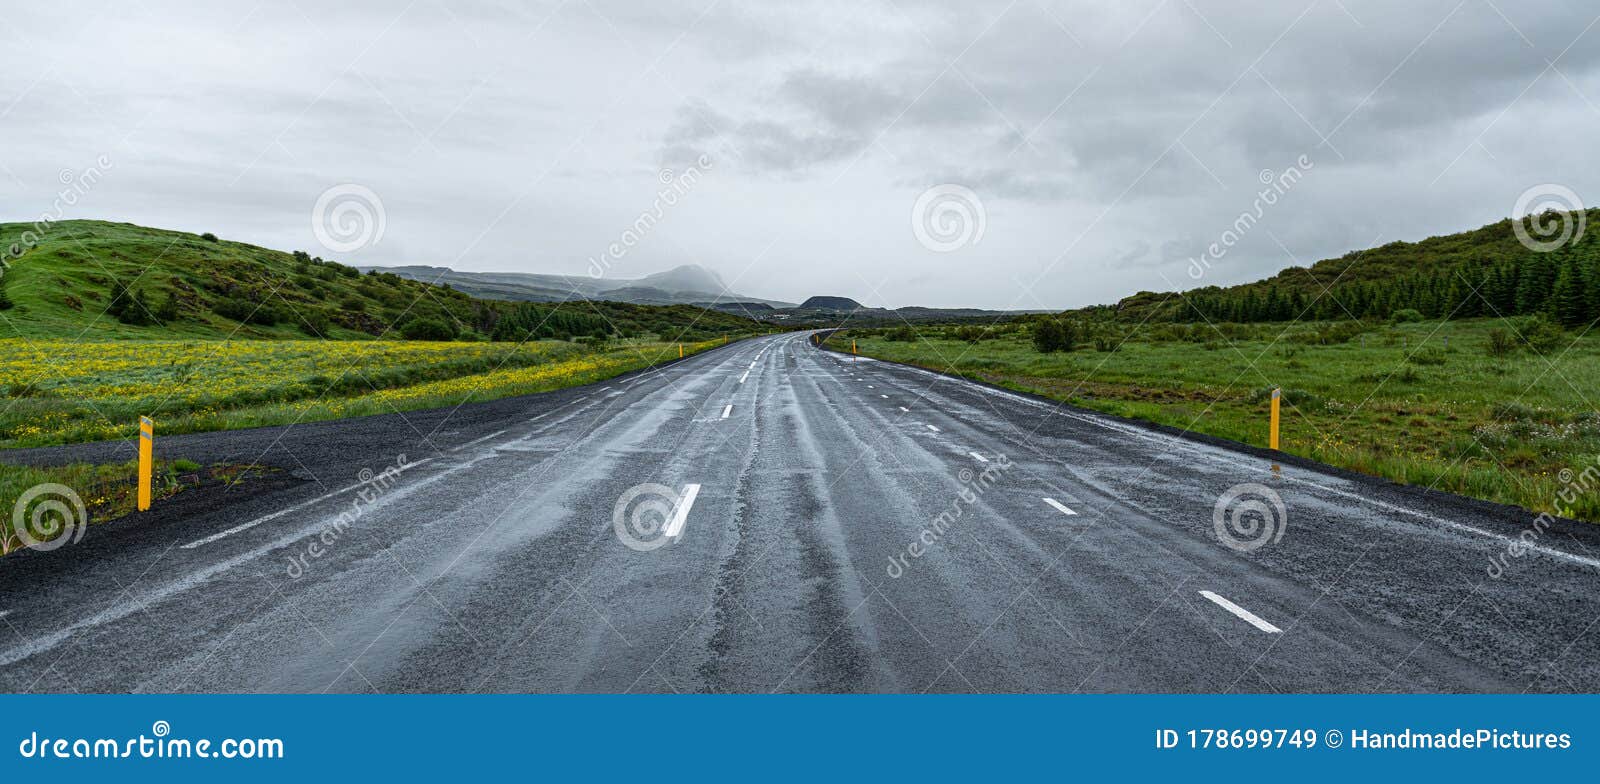 icelandic street during summer season with spectacular view